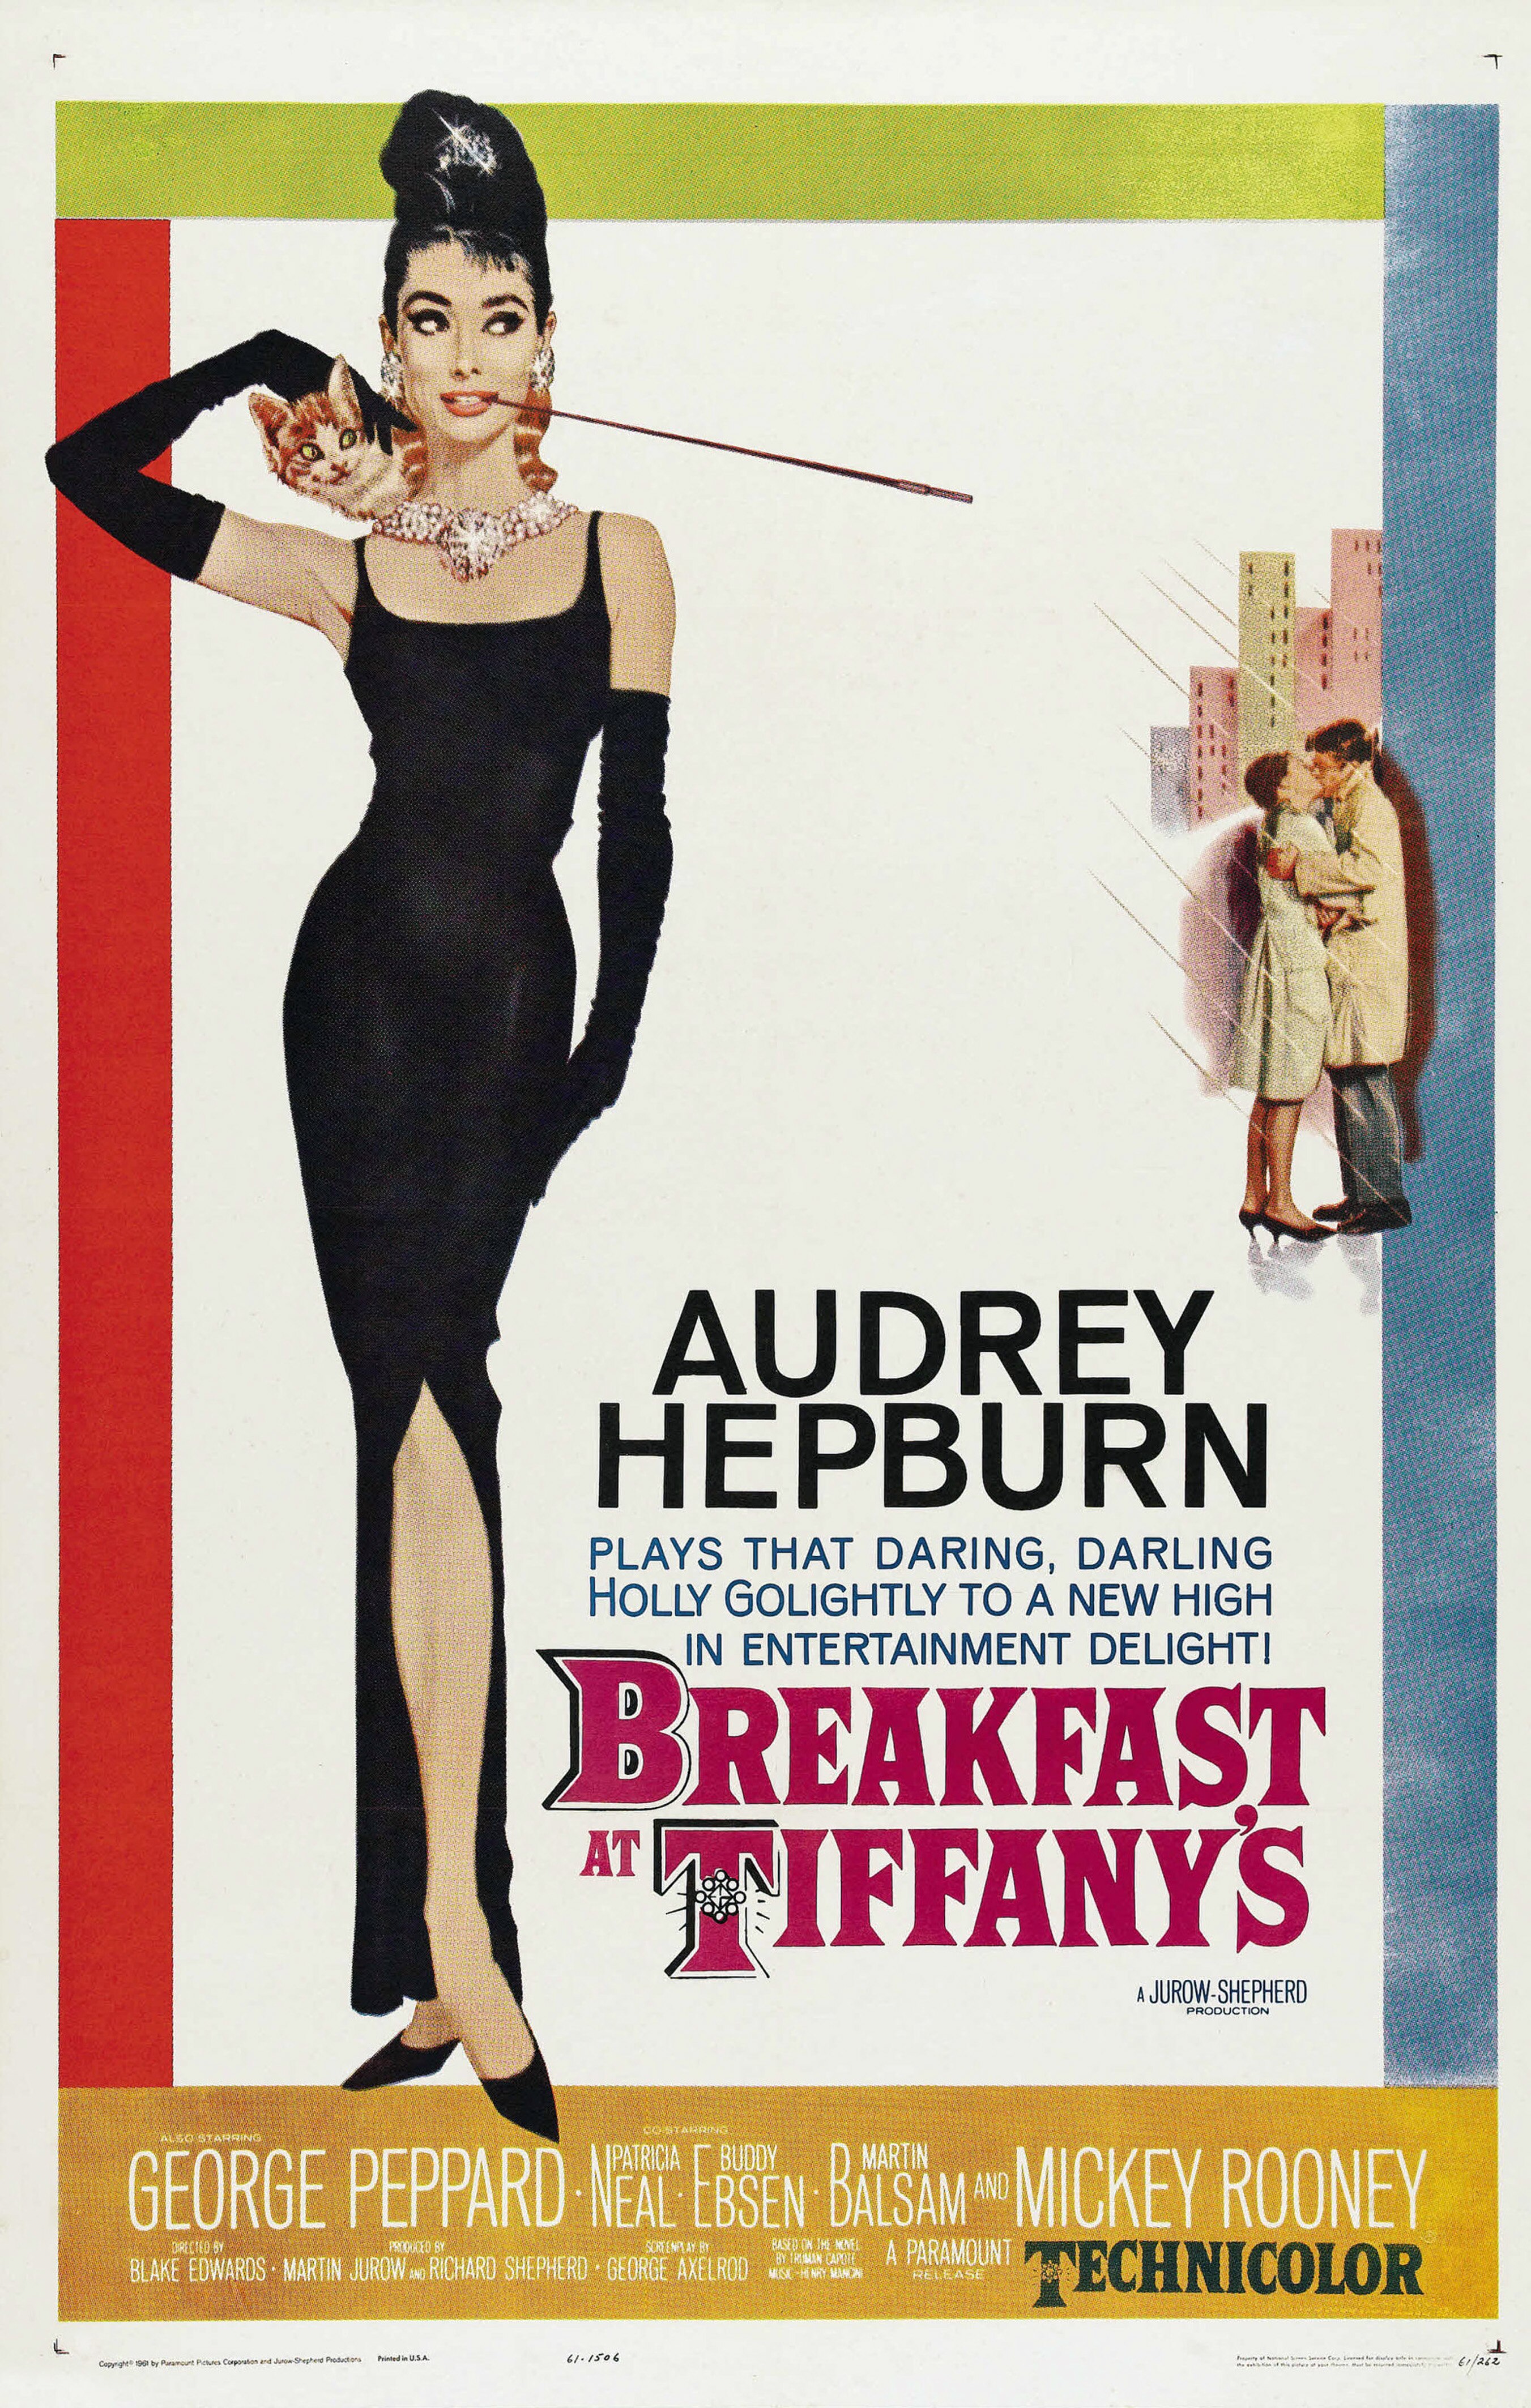 A poster of Audrey Hepburn starring in Breakfast at Tiffany's 